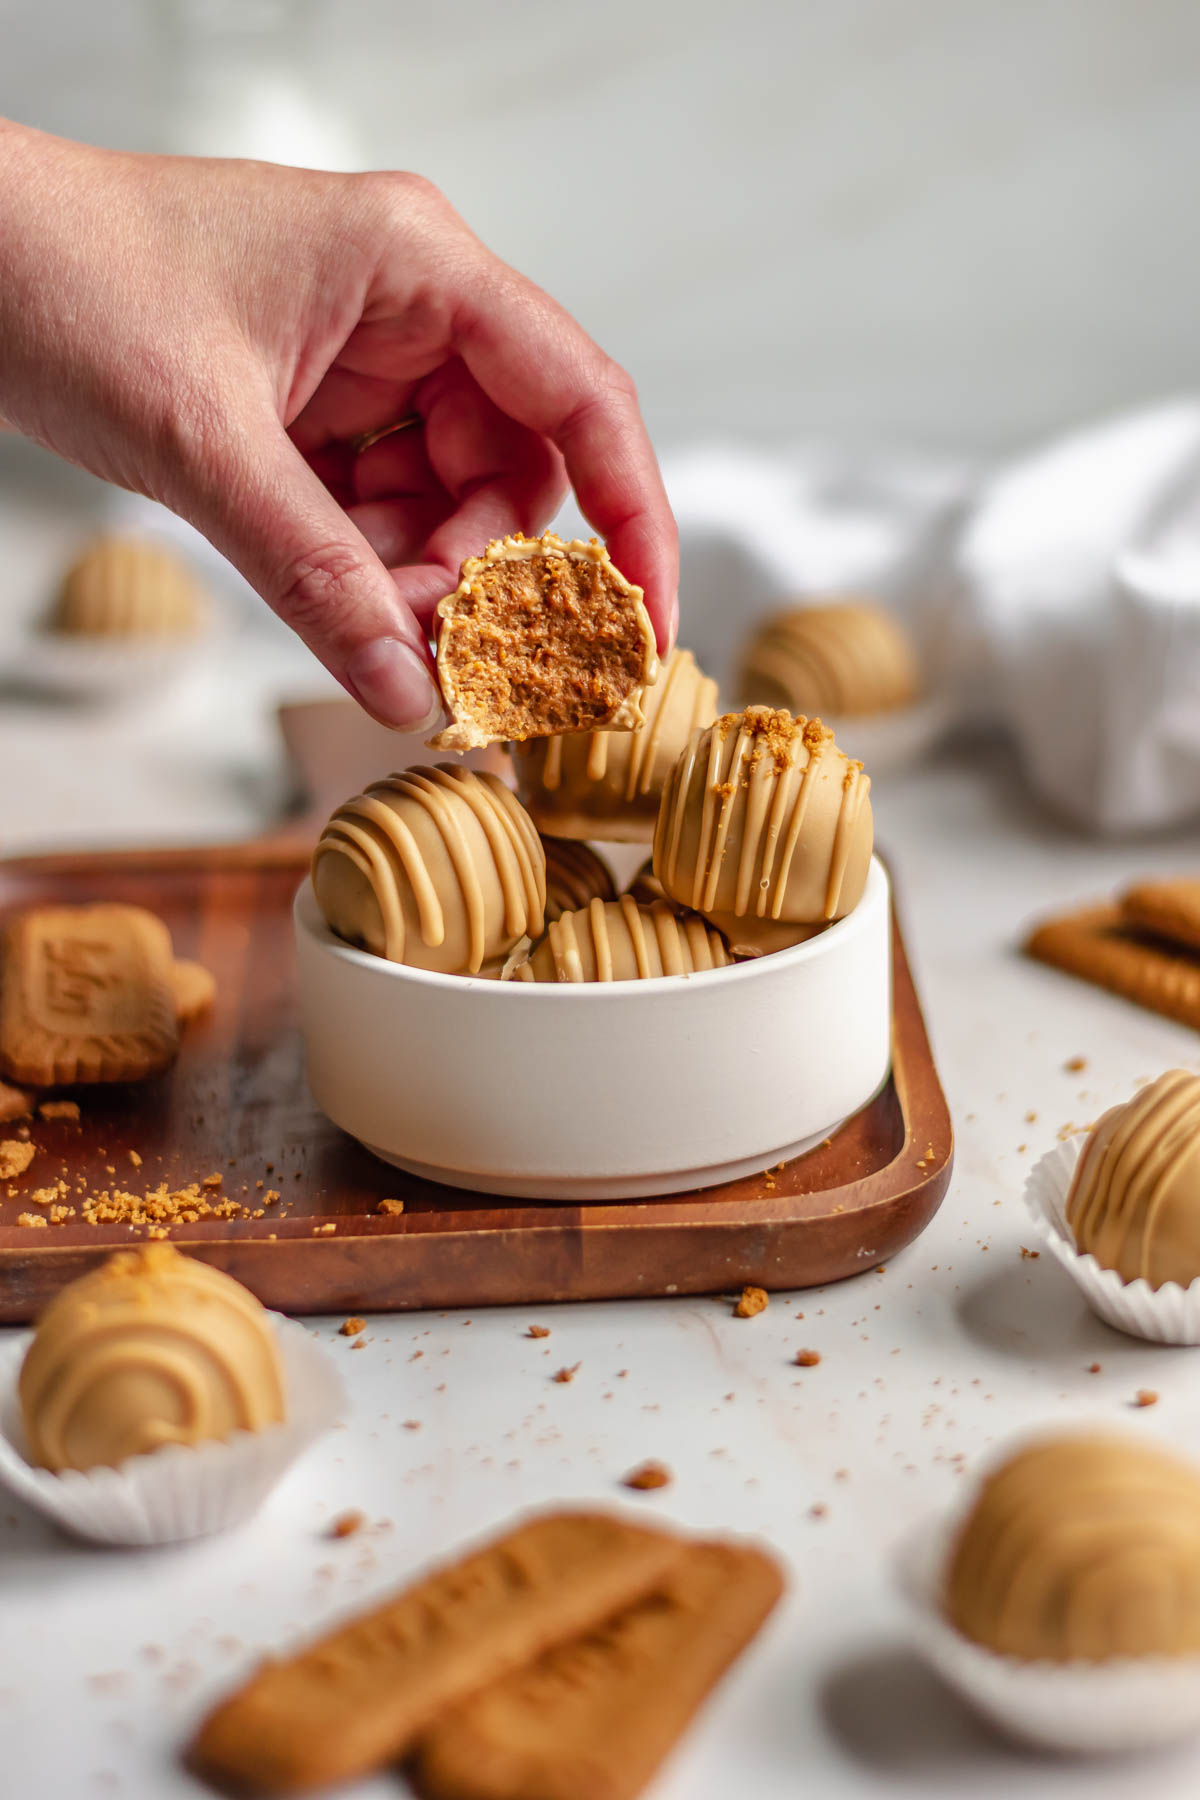 A hand reaching in to remove a biscoff truffle from a bowl.